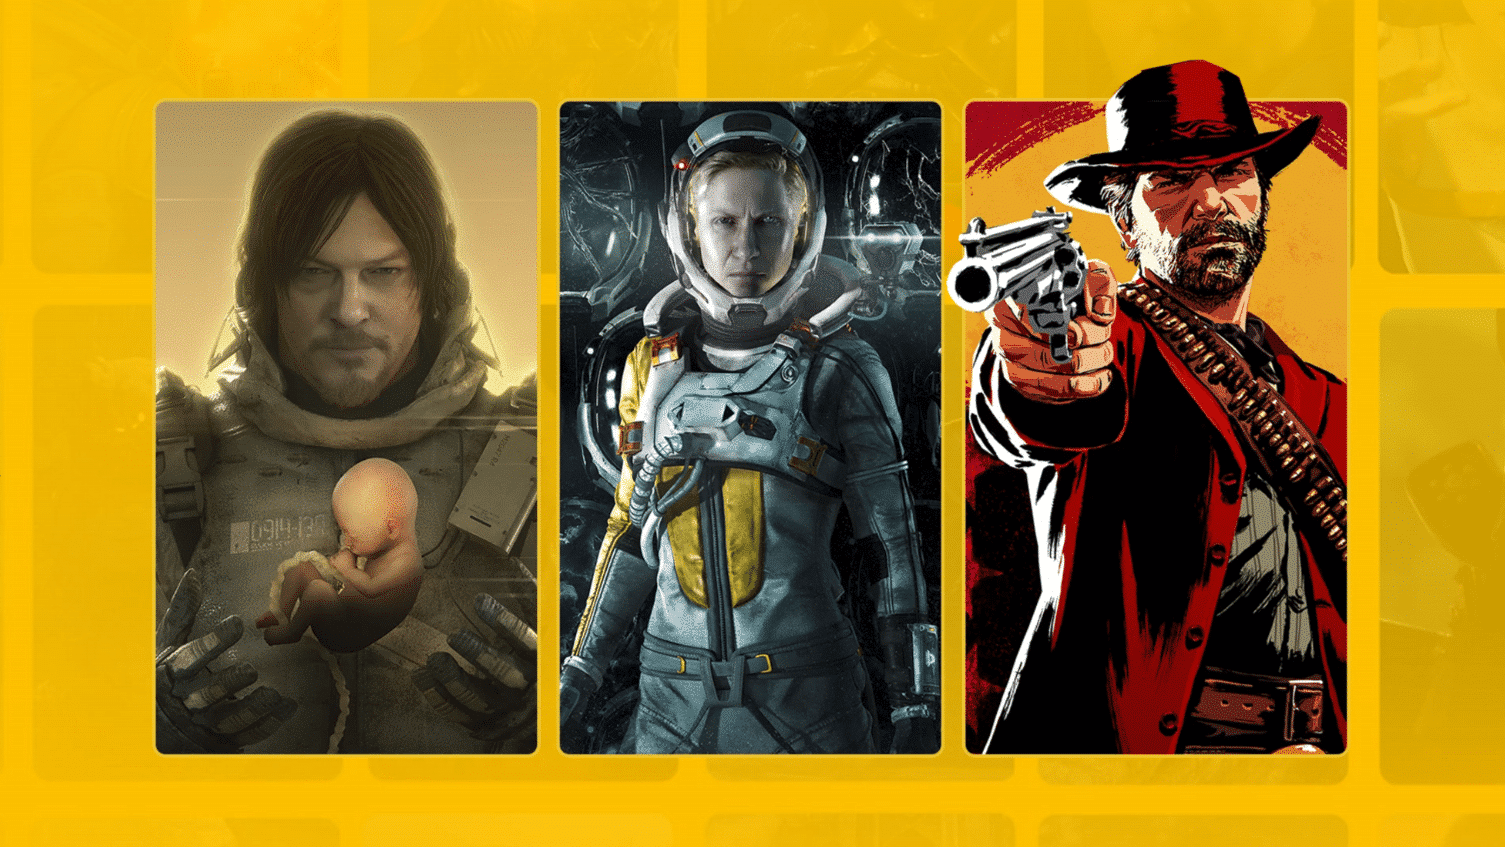 PS Plus Extra & Premium: 19 Exciting Games Added Next Week